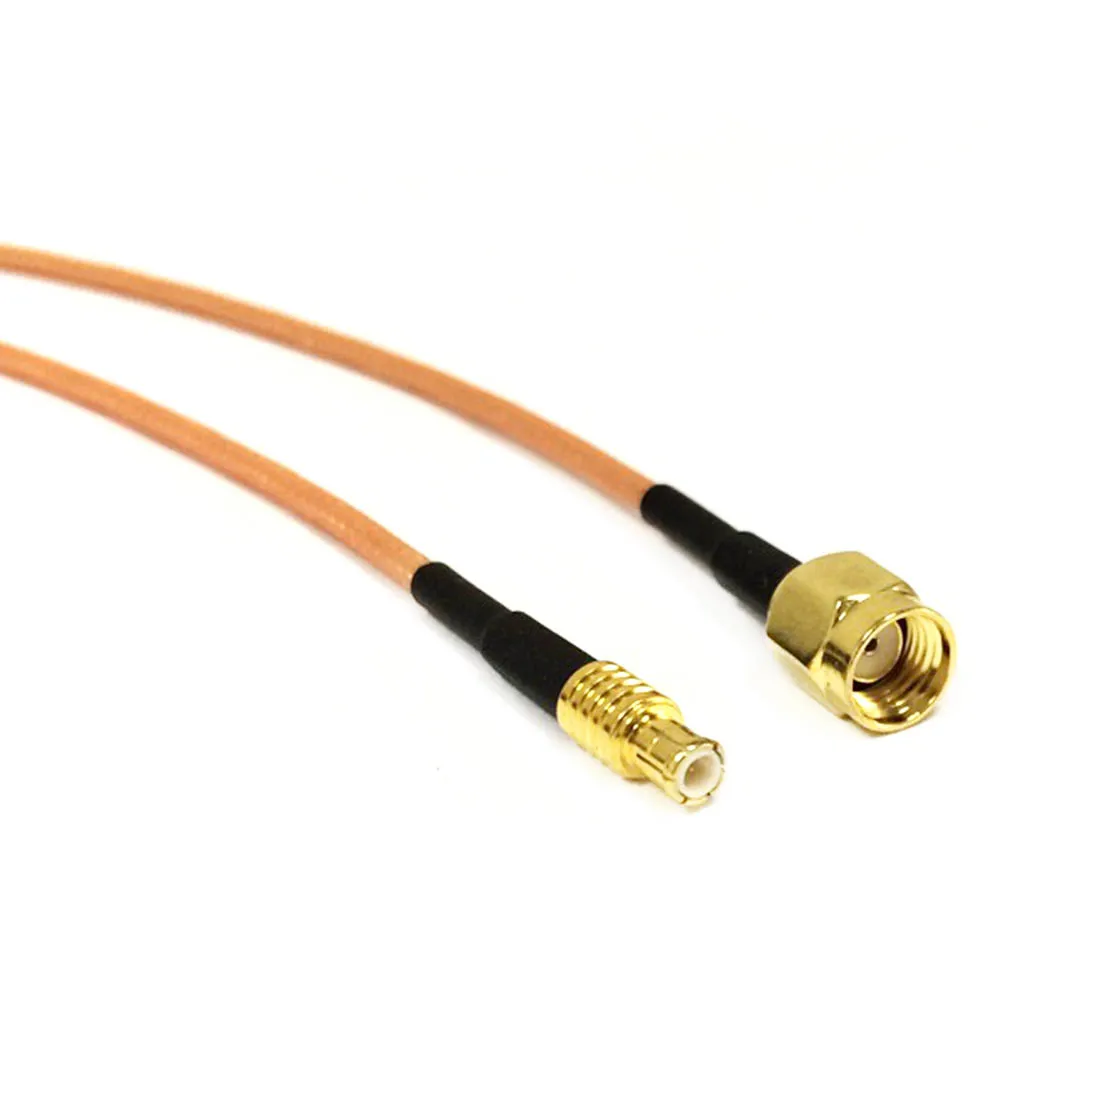 Extension Cable RP SMA Male Plug to MCX Male Plug RG316 Coaxial Cable Pigtail 15cm 6inch New